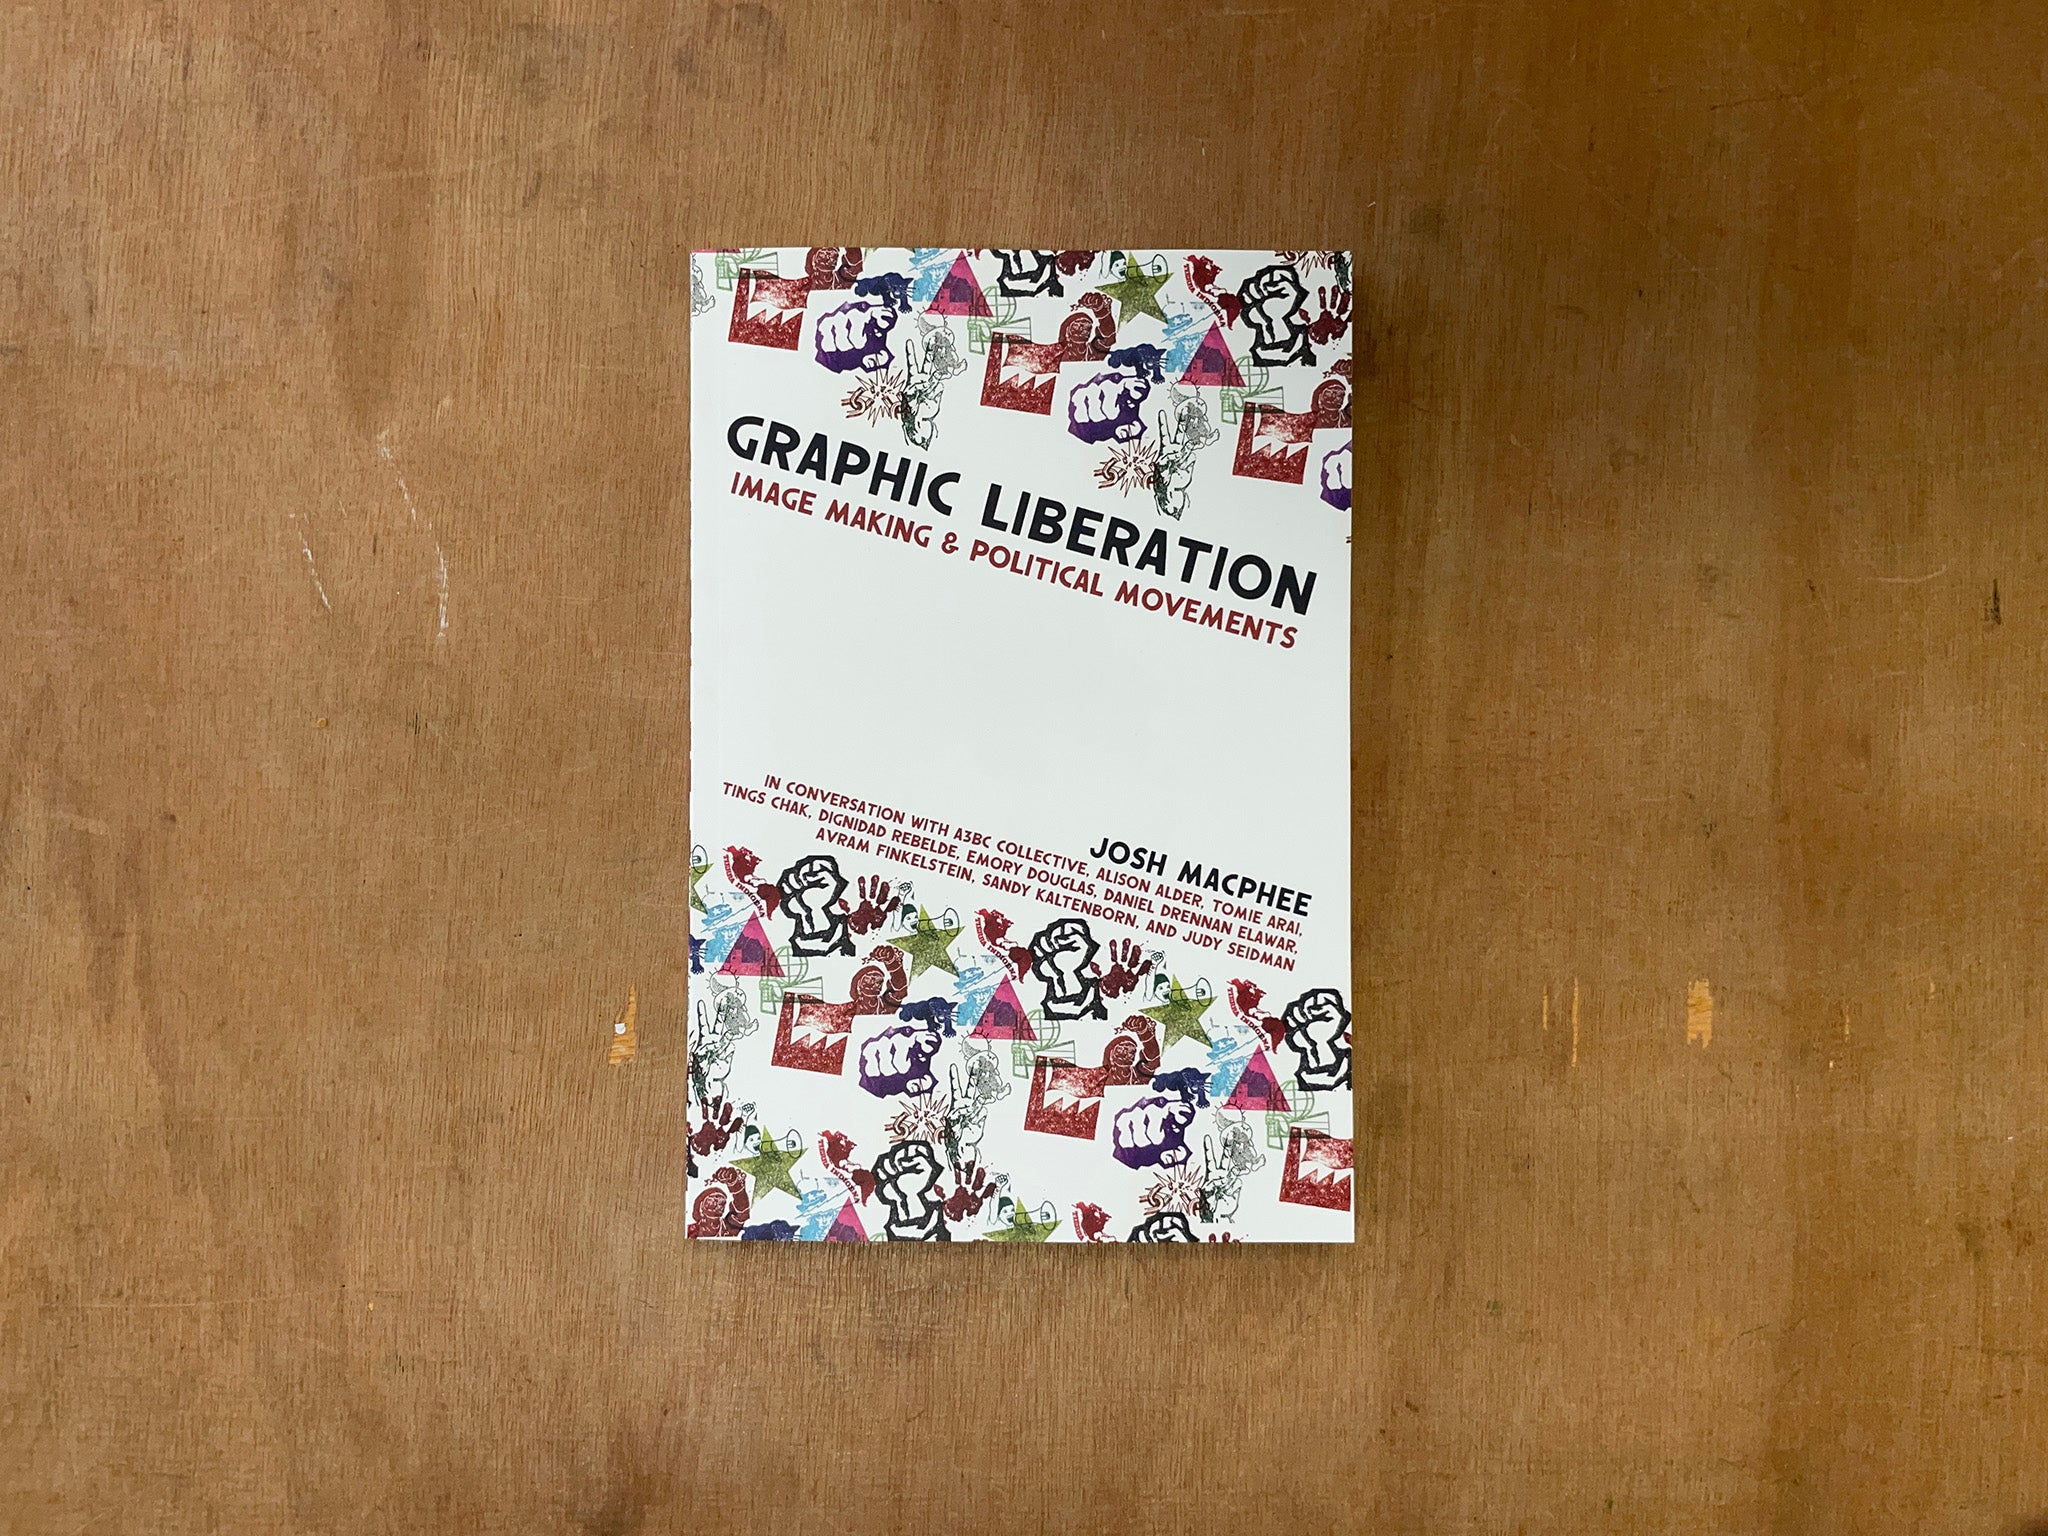 GRAPHIC LIBERATION: IMAGE MAKING AND POLITICAL MOVEMENTS by Josh MacPhee